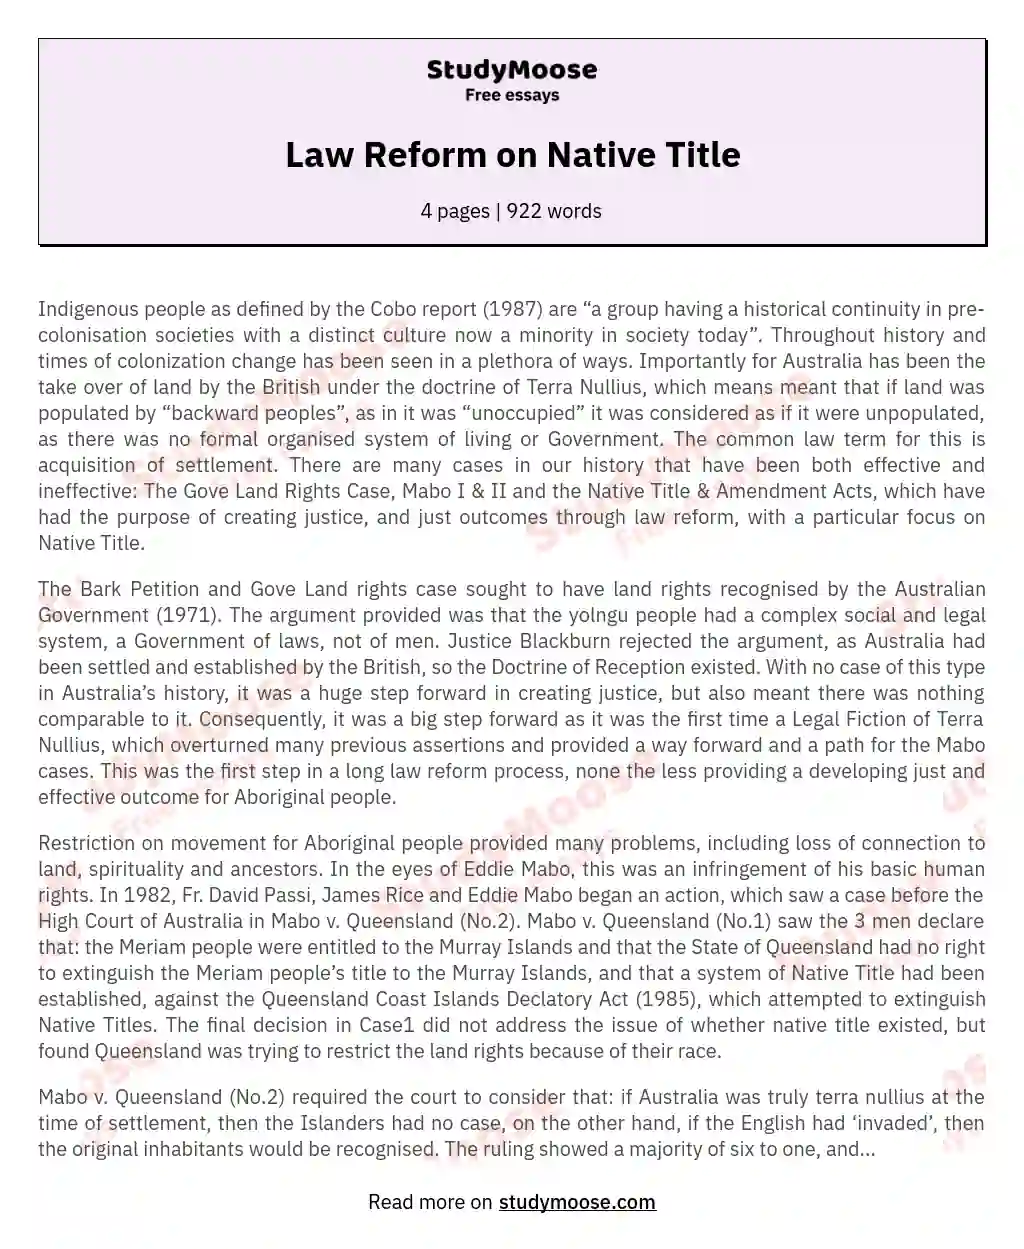 Law Reform on Native Title